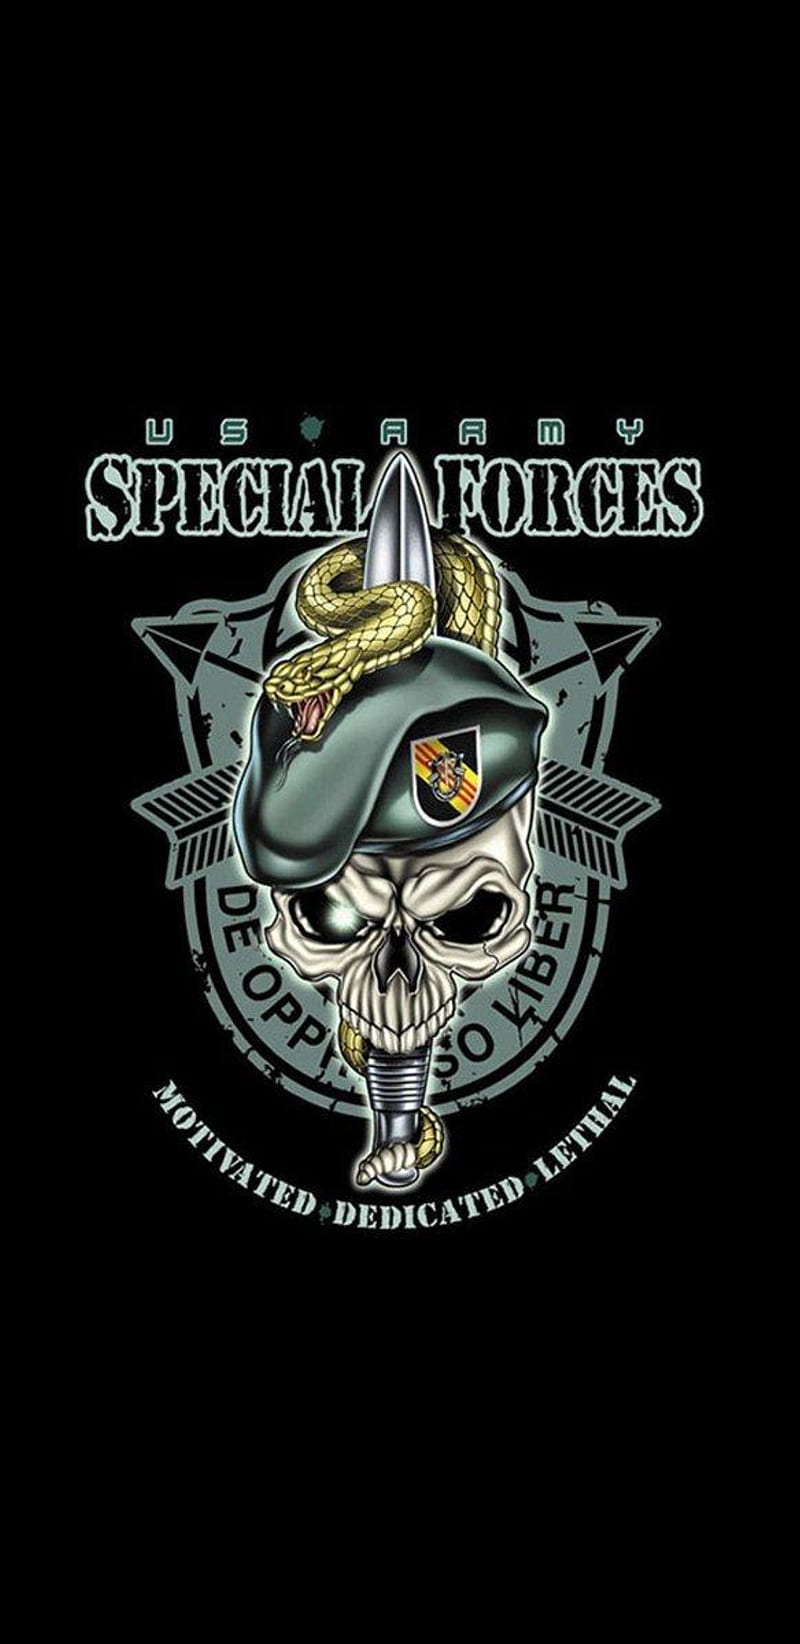 US Army, army, special forces, HD phone wallpaper